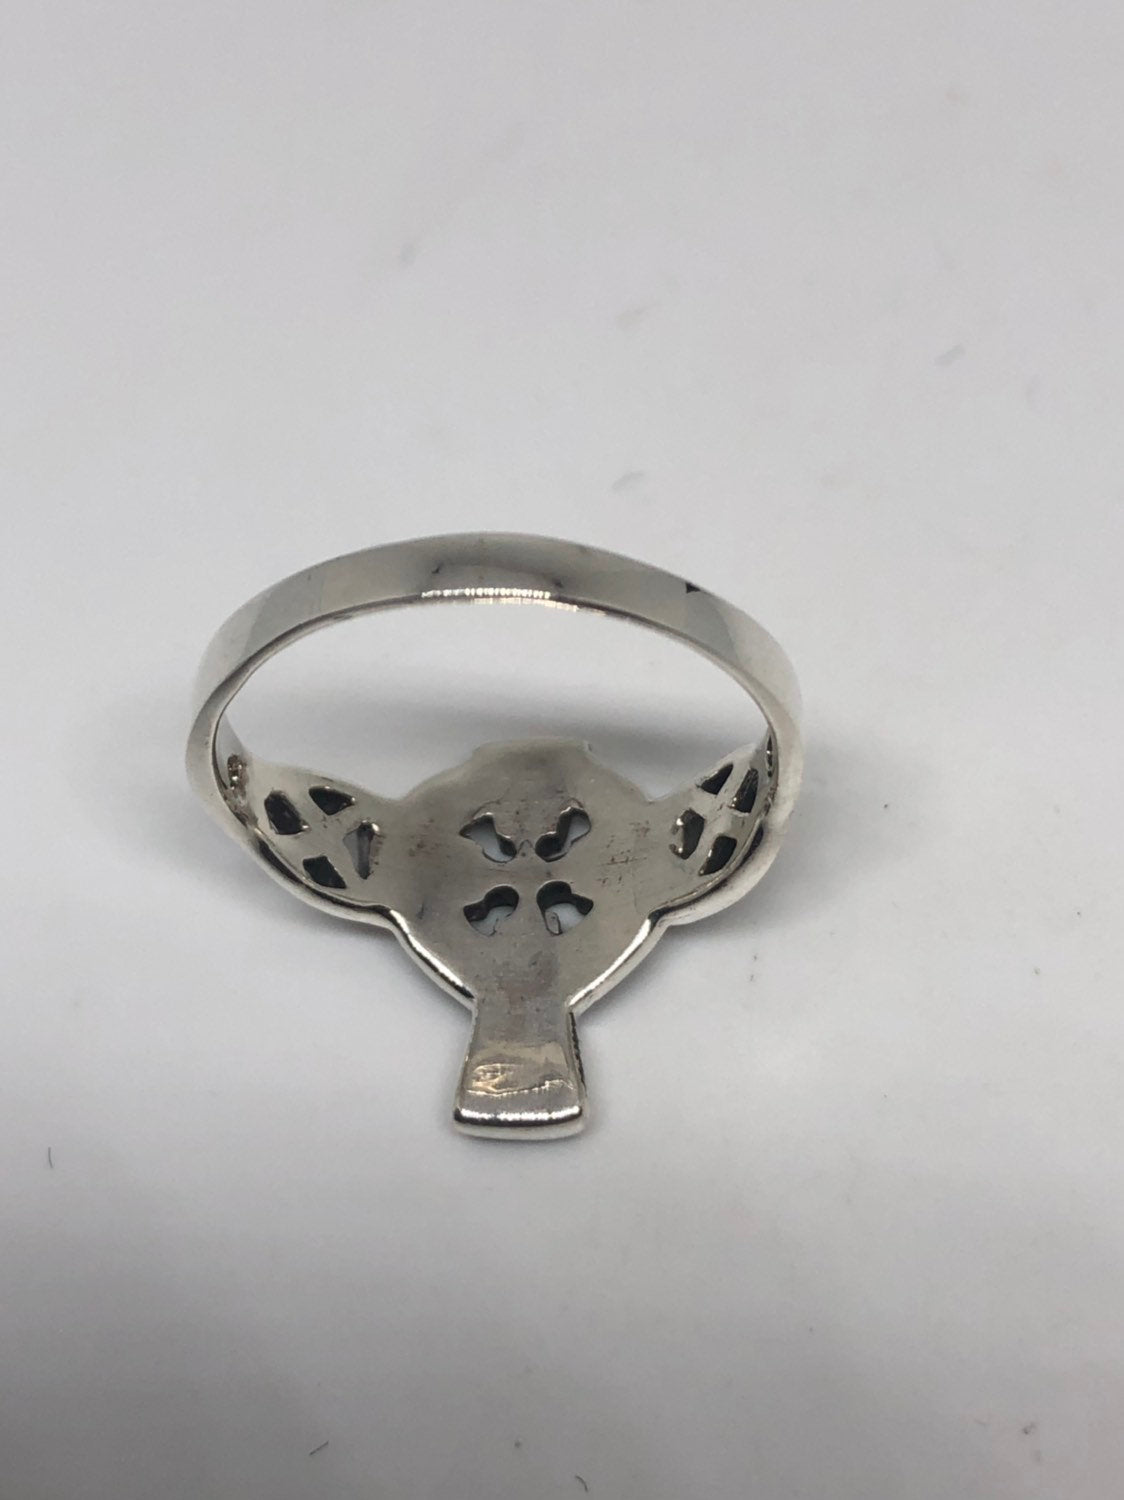 Vintage Gothic 925 Sterling Silver Celtic Cross Ring